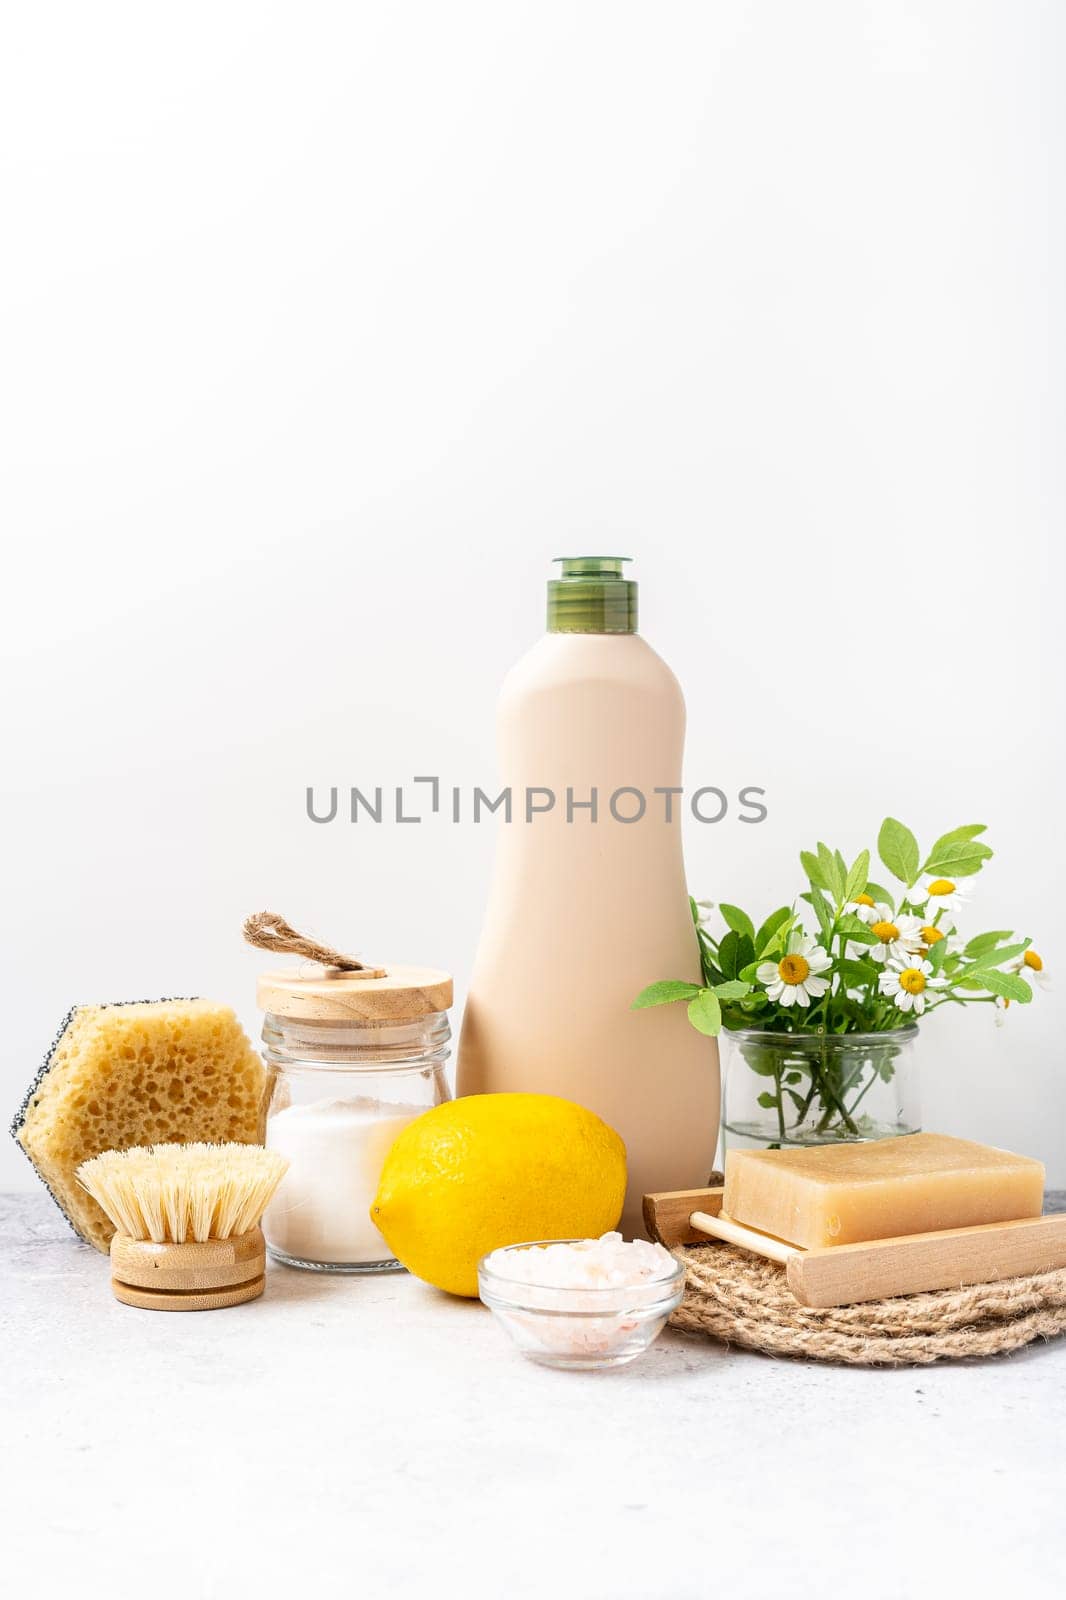 Eco friendly natural cleaners, jar with baking soda, dish brush, lemon, flowers, soap on white background. Organic ingredients for homemade cleans with mock up bottle. Zero waste concept, copy space by Ostanina